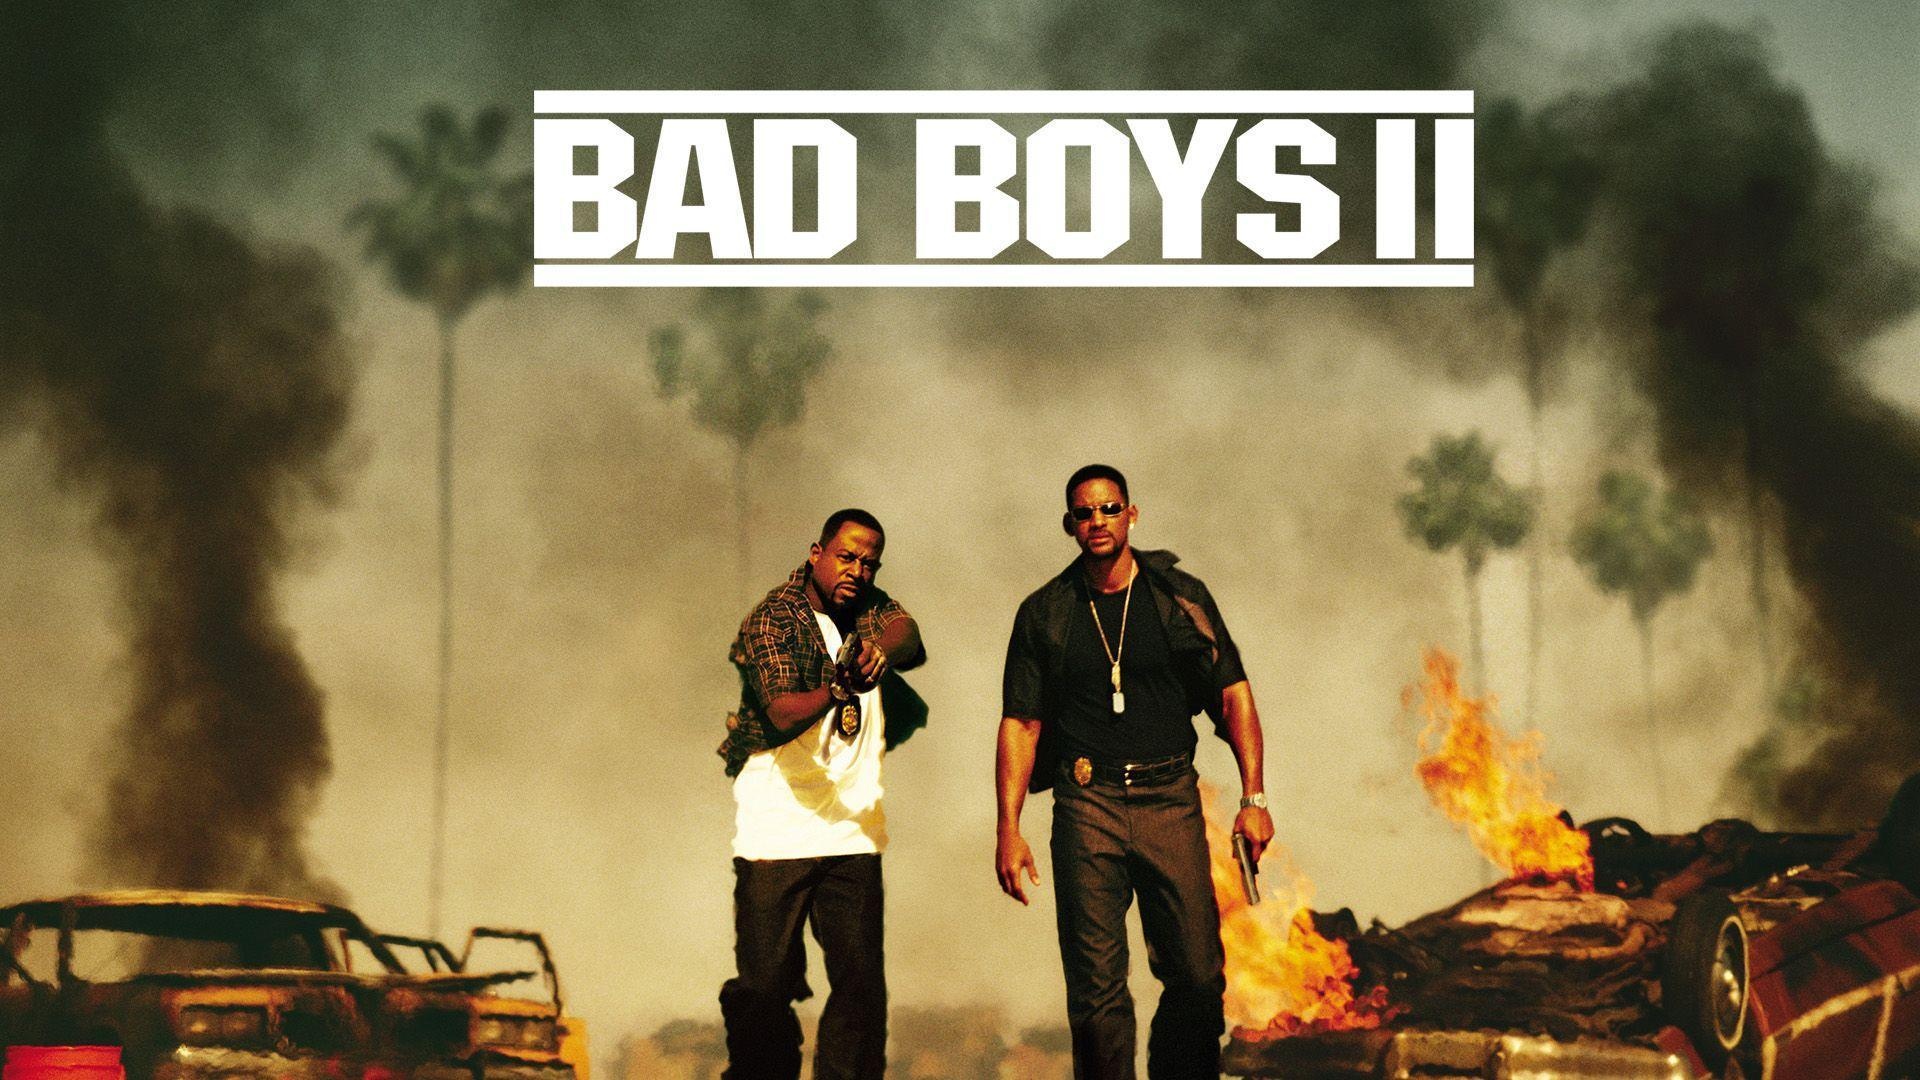 Michael Bay, Action-packed movies, Ultimate action movie club, Bad Boys 2, 1920x1080 Full HD Desktop